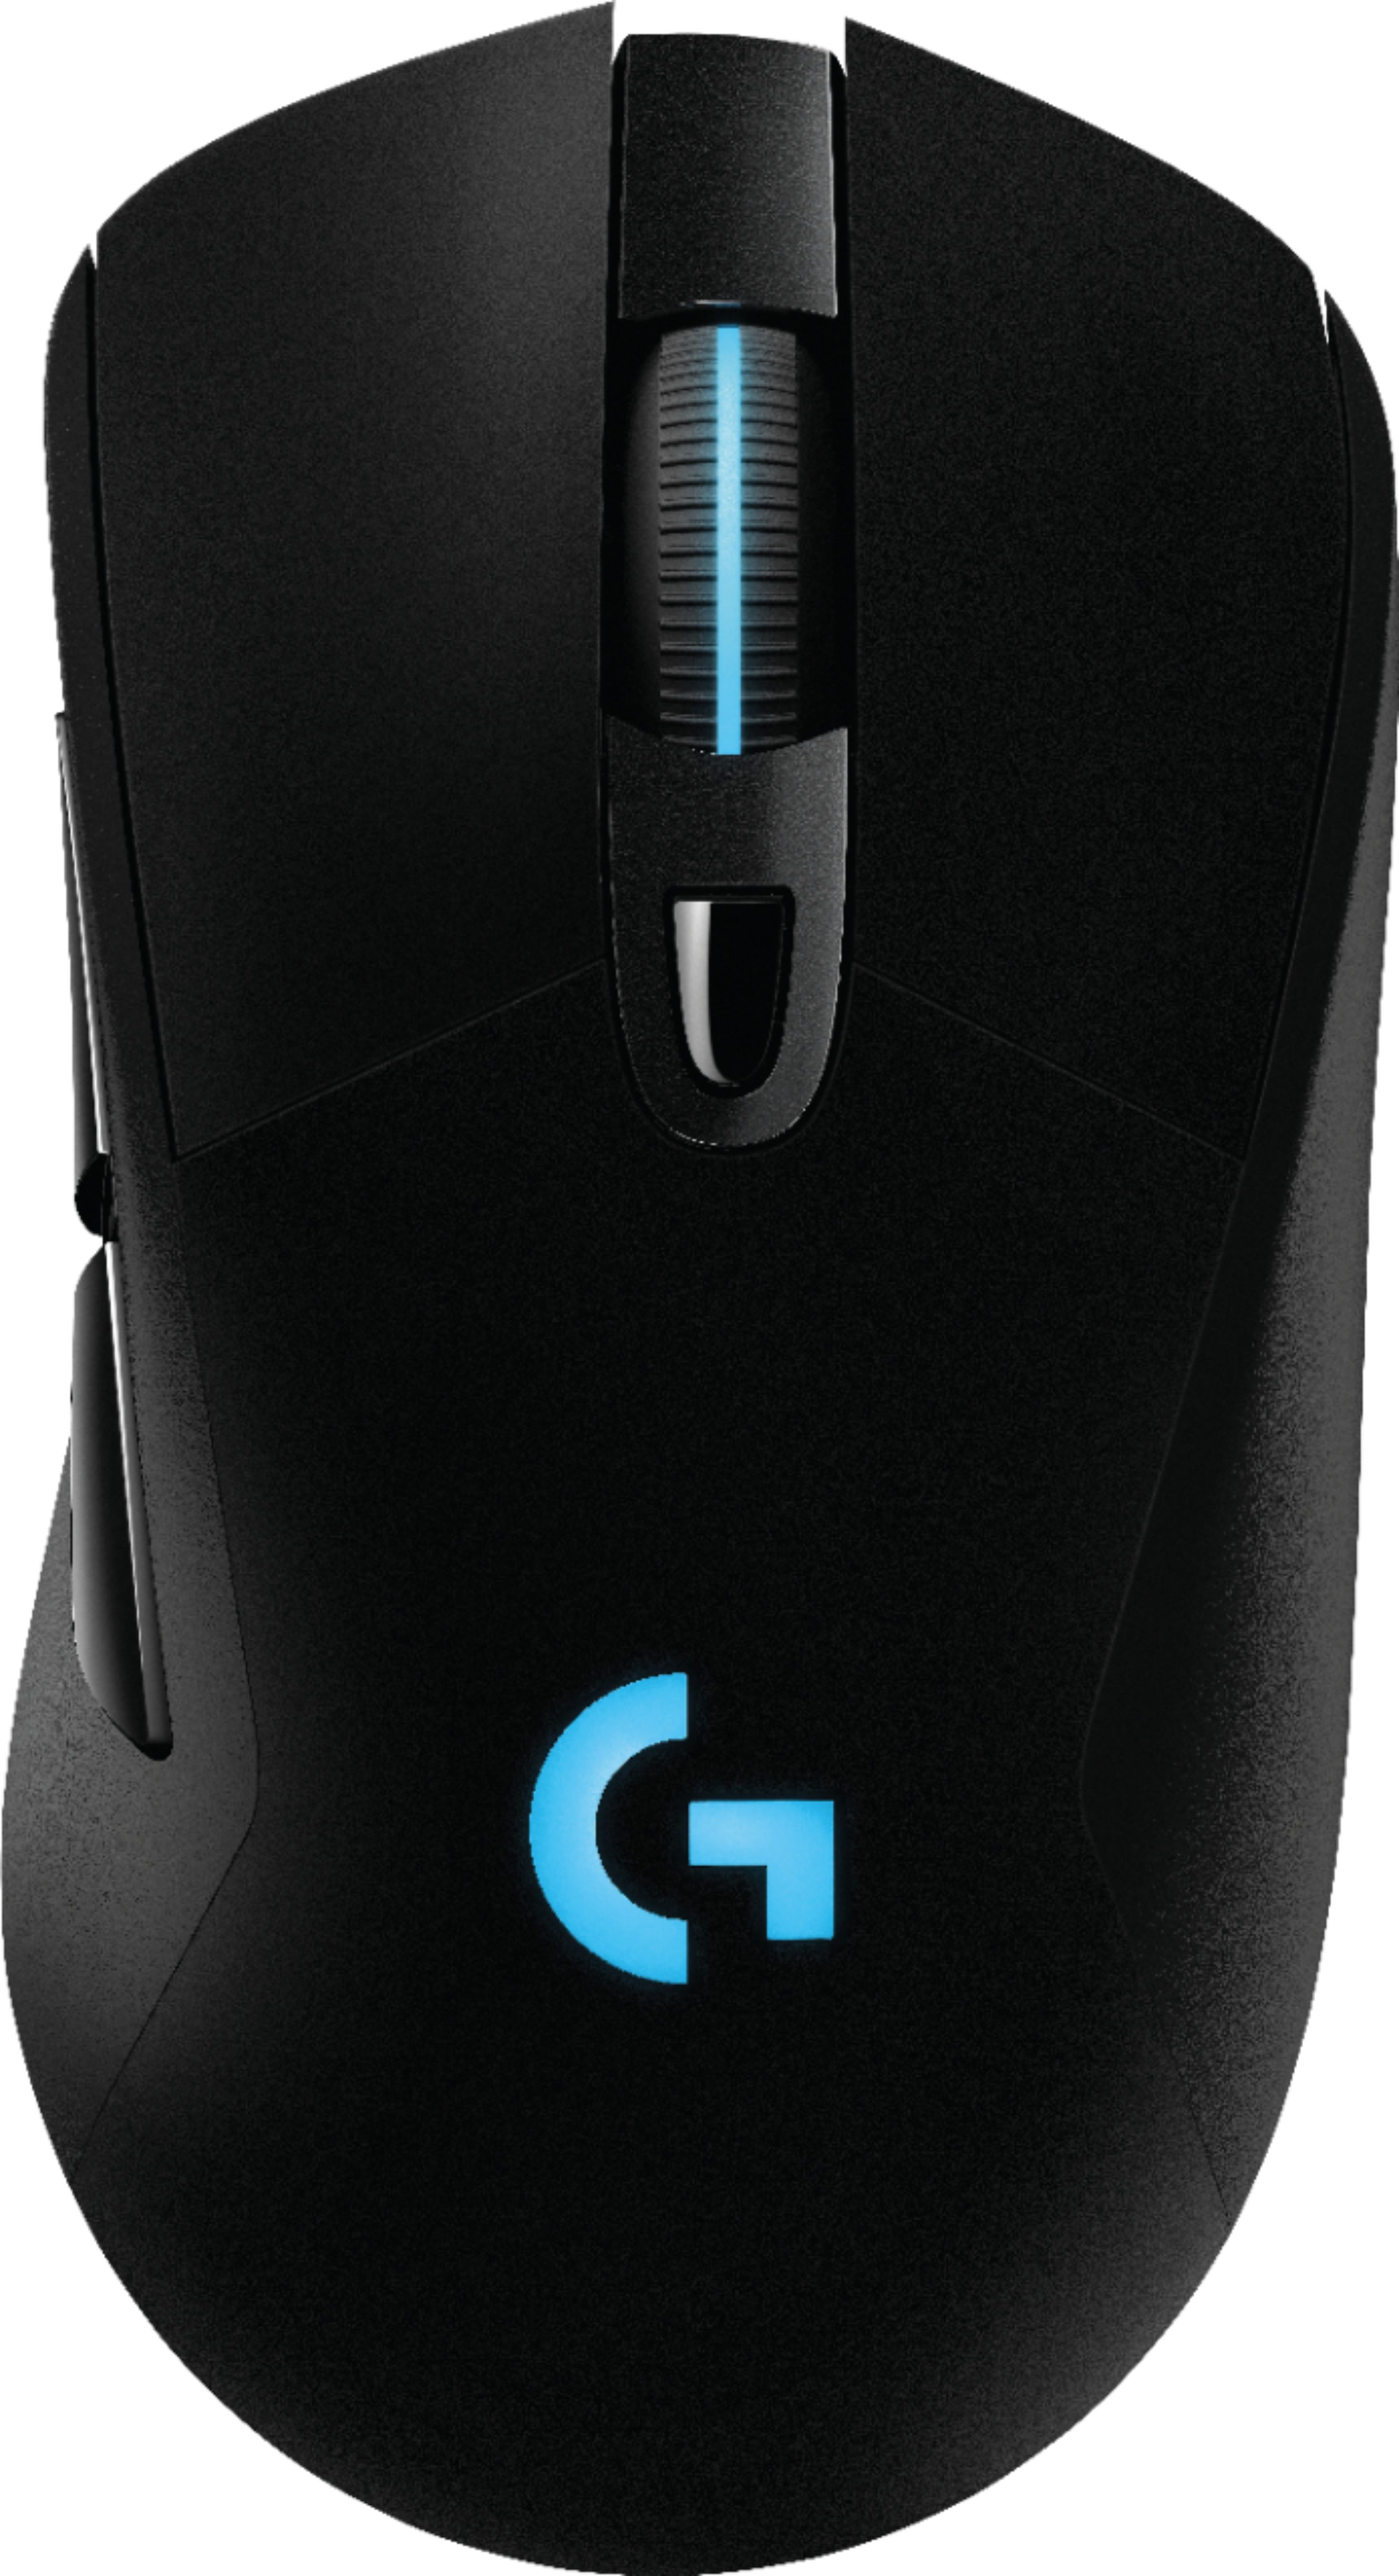 Logitech G G403 HERO Wired Optical Gaming Mouse - Black - Micro Center